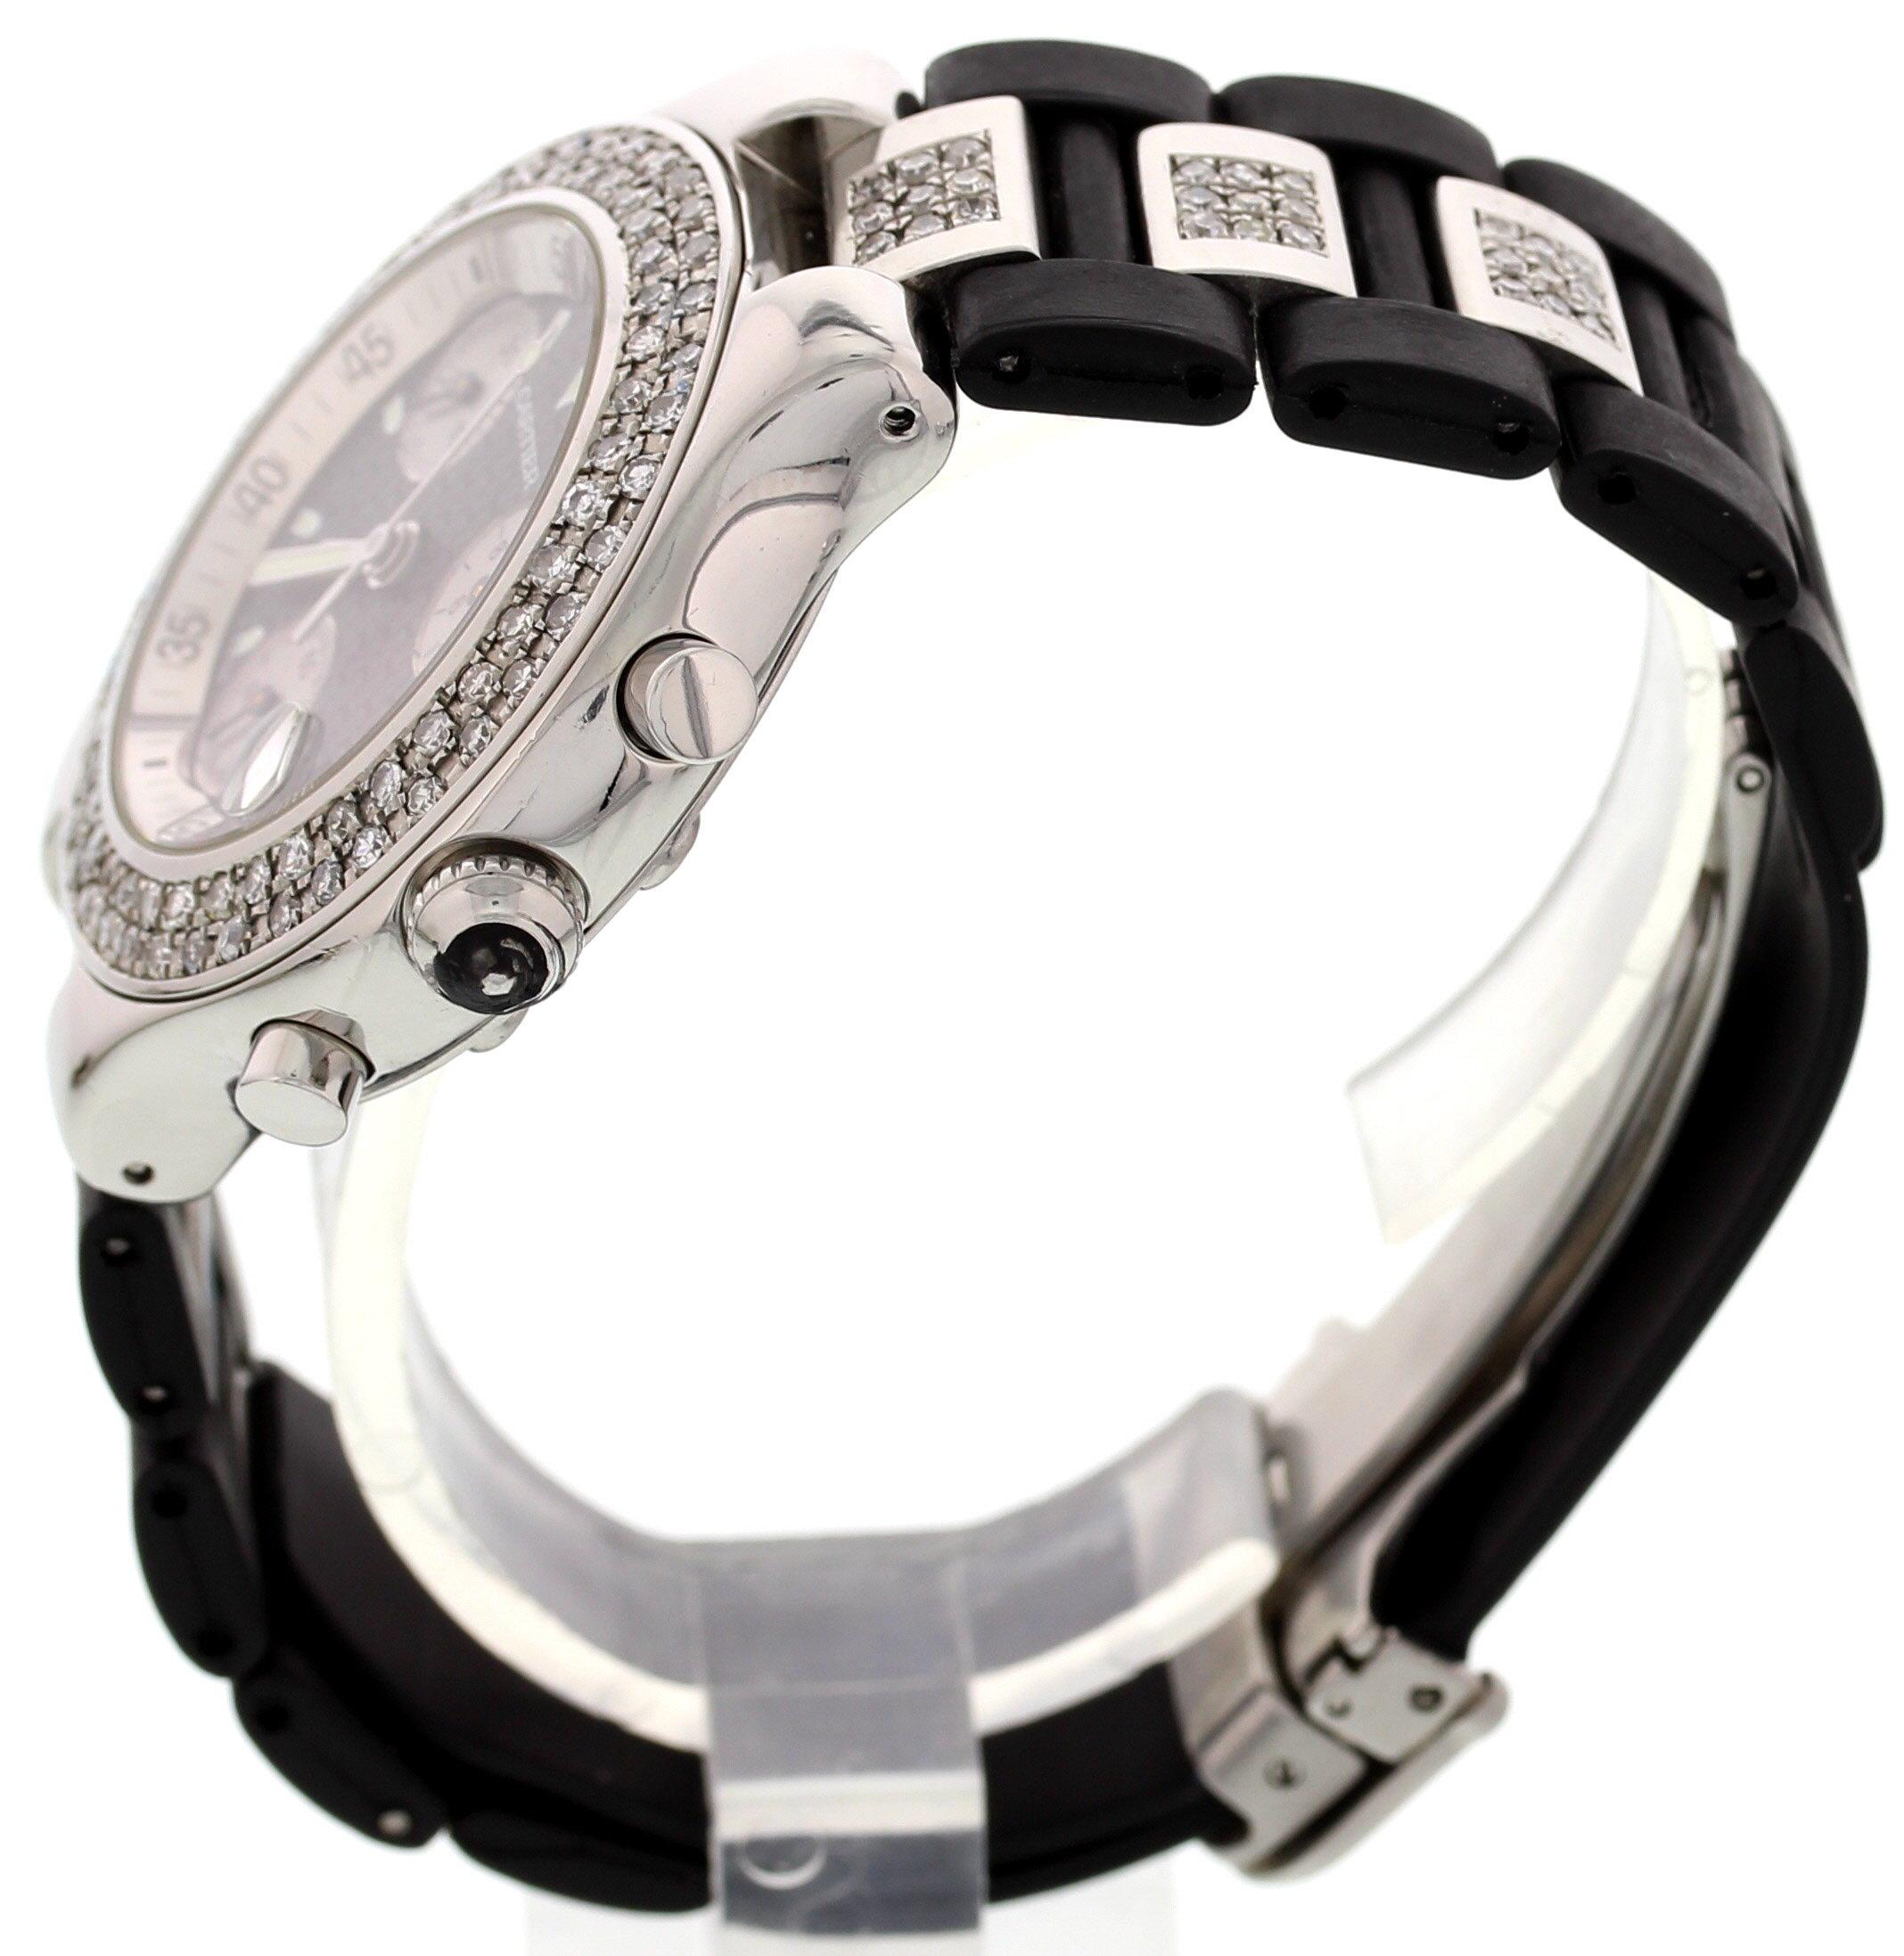 Men's Cartier Must 21 Chronoscaph watch. 38 mm stainless steel case. Custom set diamond bezel. Black dial with a Cartier logo pattern. Luminous hands & markers, and a magnified date display. Black rubber band with stainless steel and diamonds with a